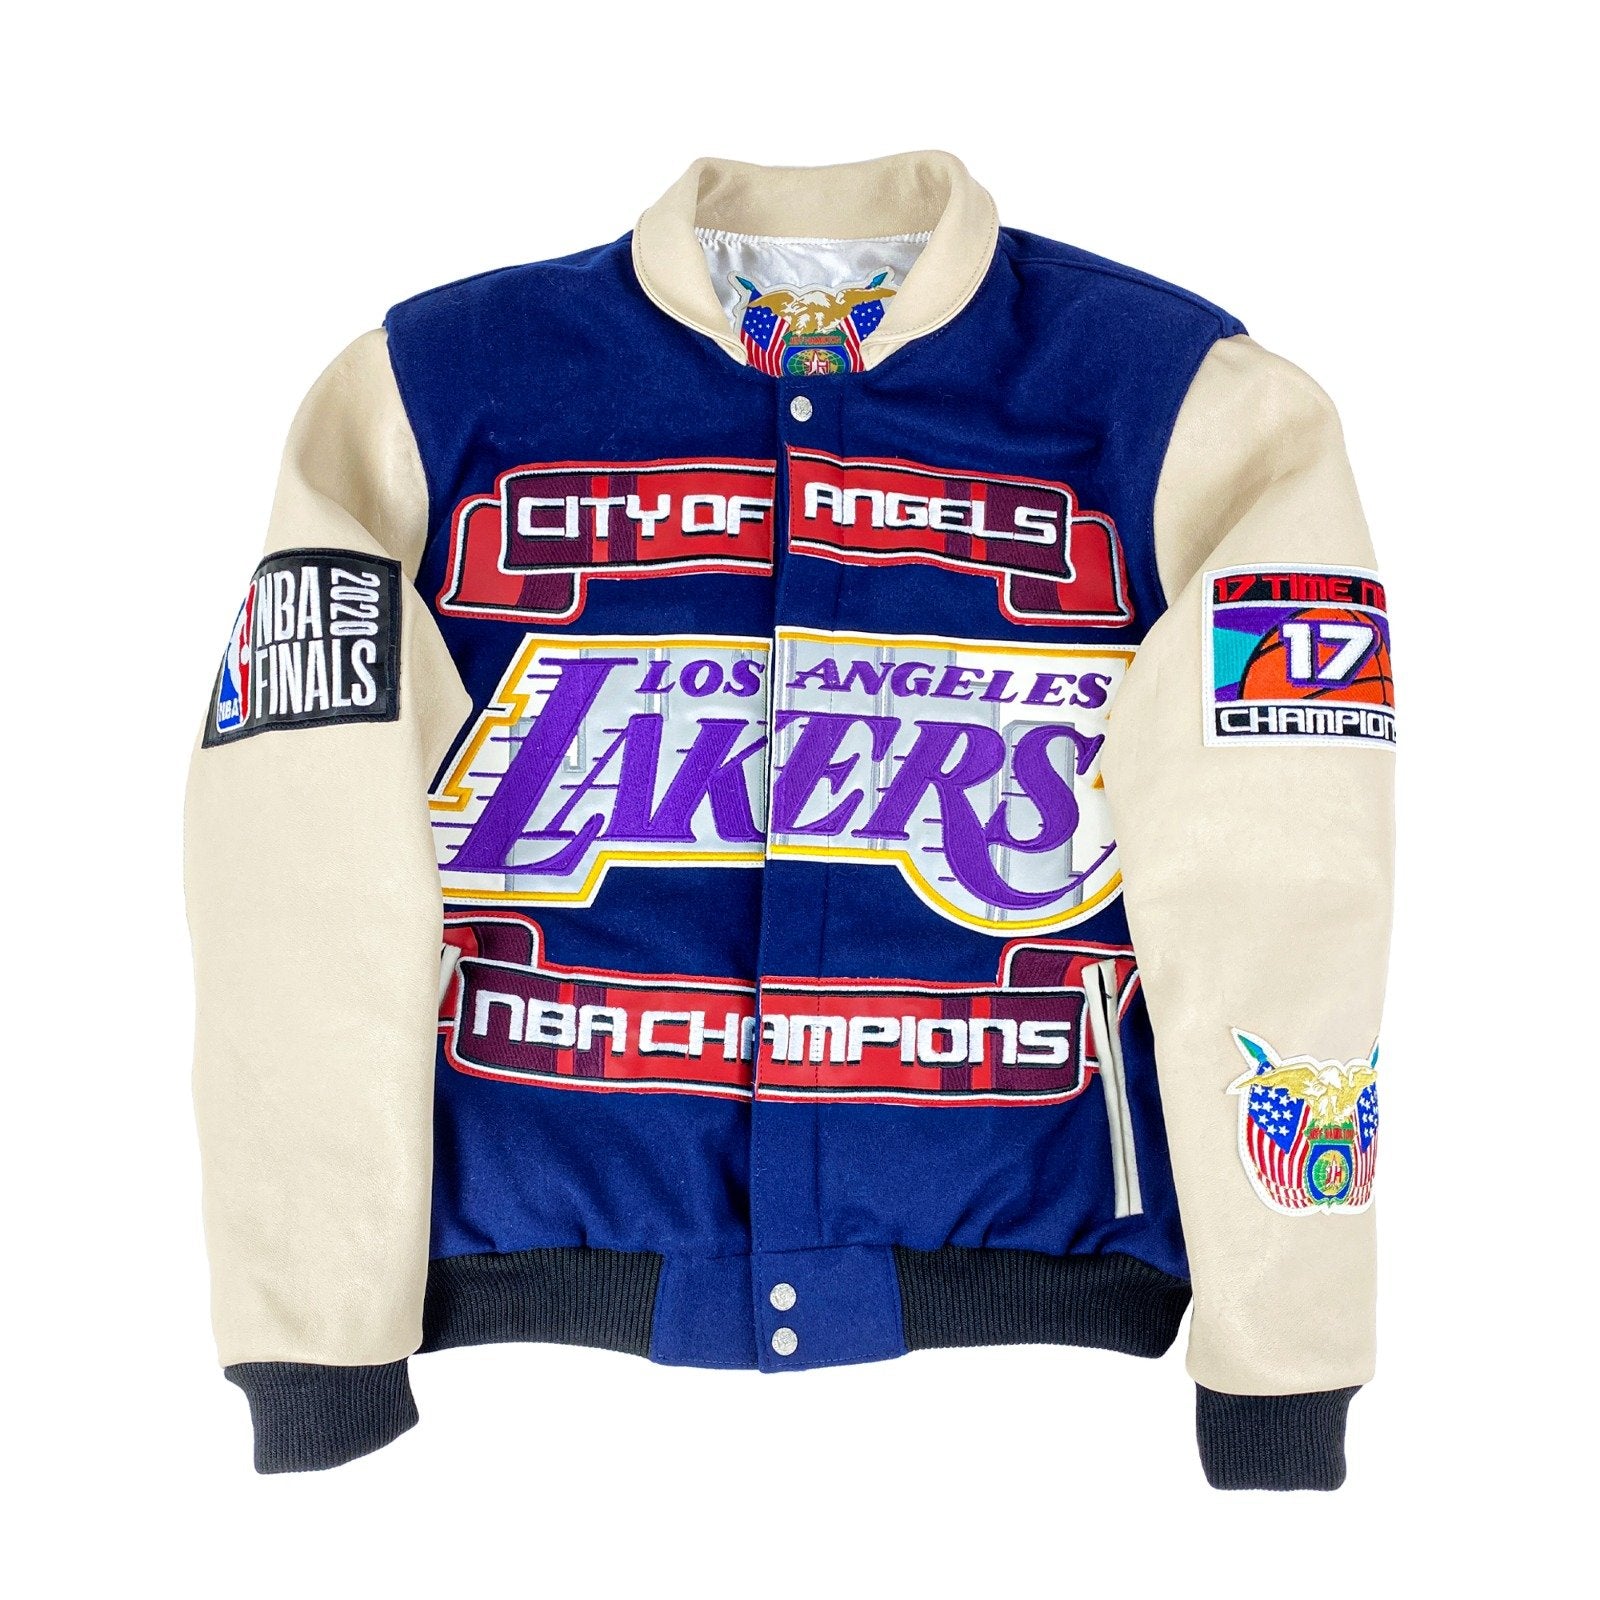 Jeff Hamilton - Introducing the wool & leather 2020 Lakers